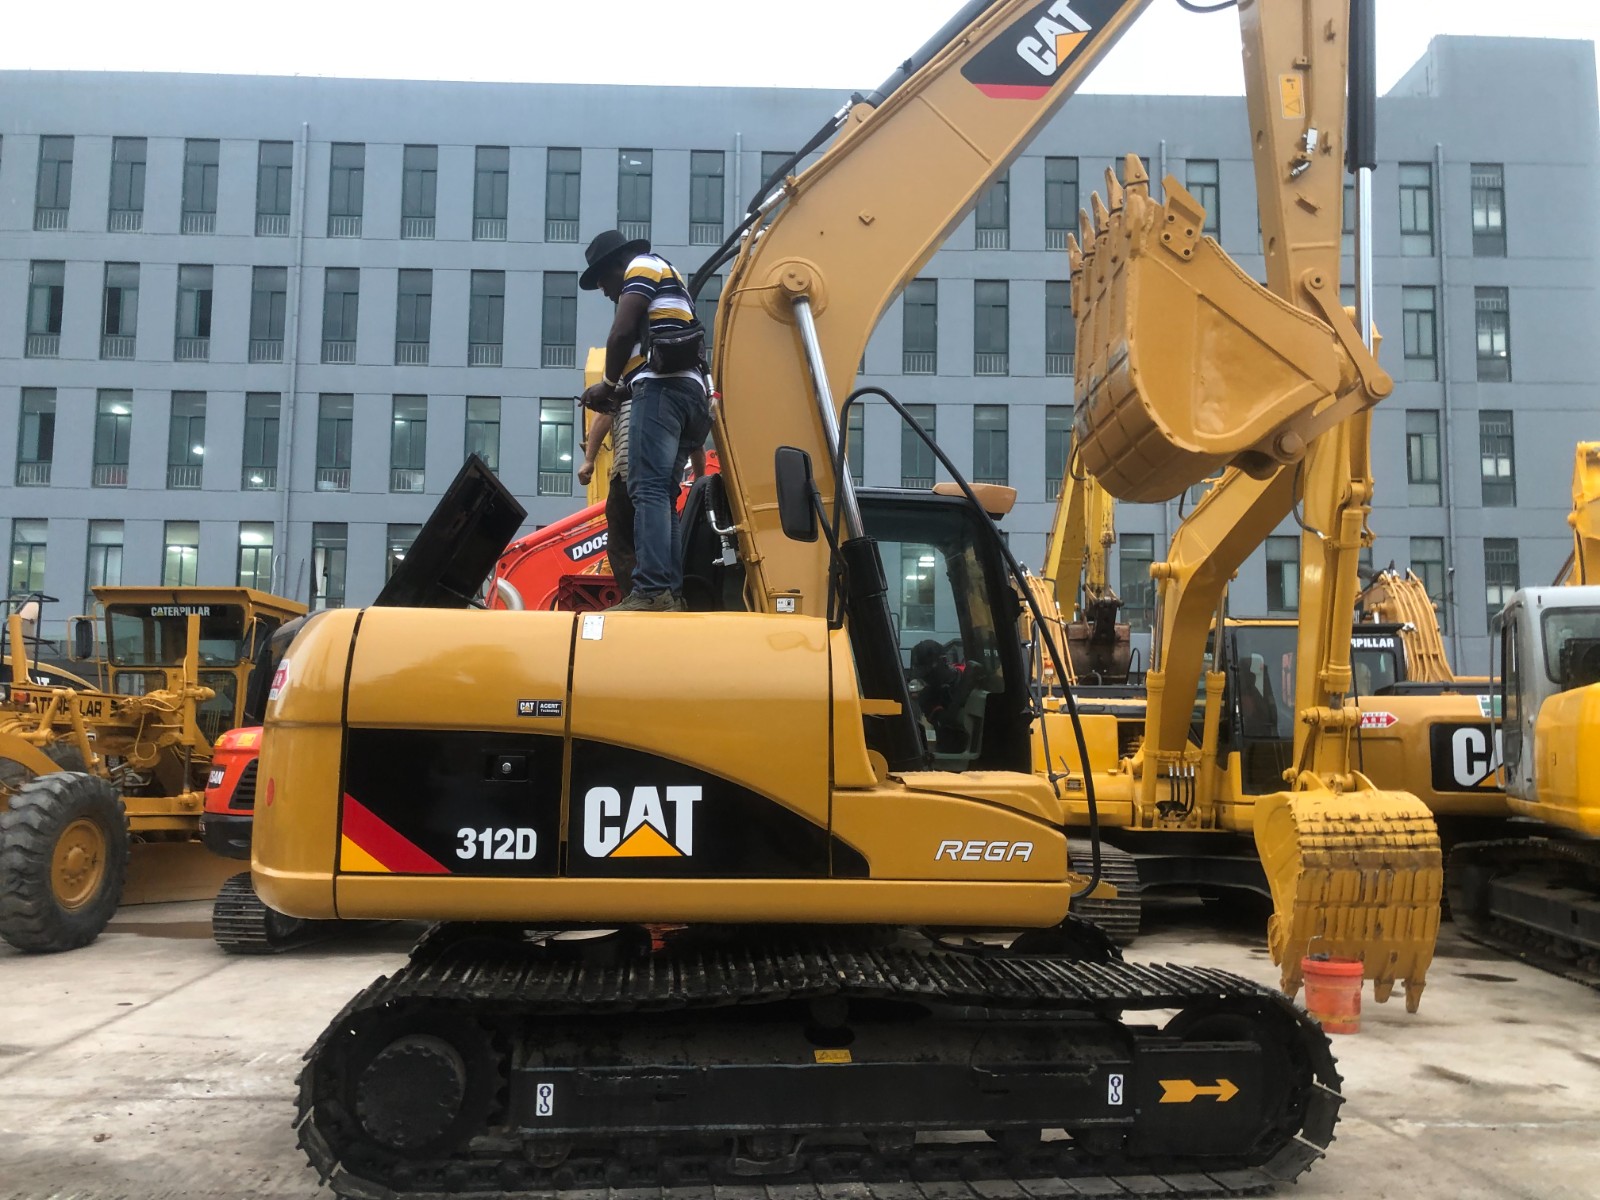 A Libyan customer decided to buy a CAT 312d excavator on the spot after visiting our warehouse